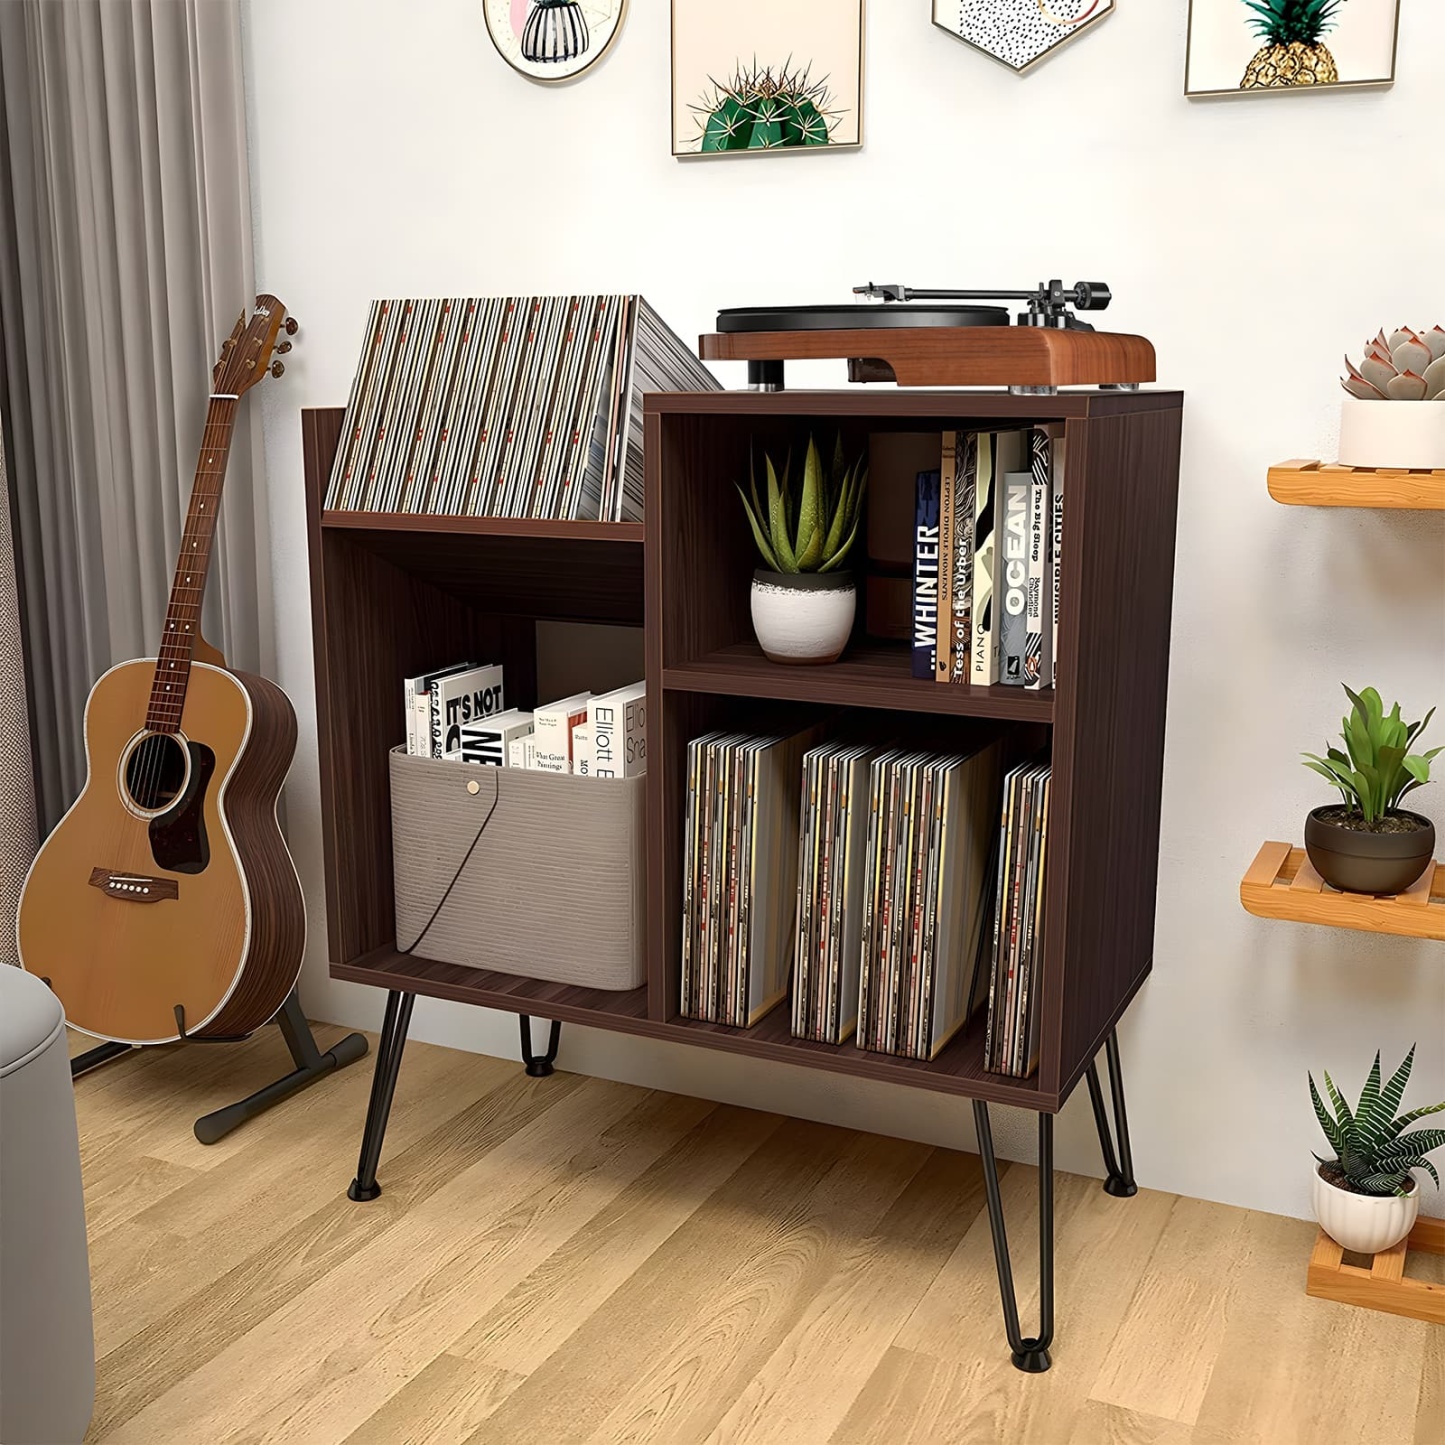 Wooden Vinyl Stand For Record Storage – Retrolife, Inc. All Rights Reserved.